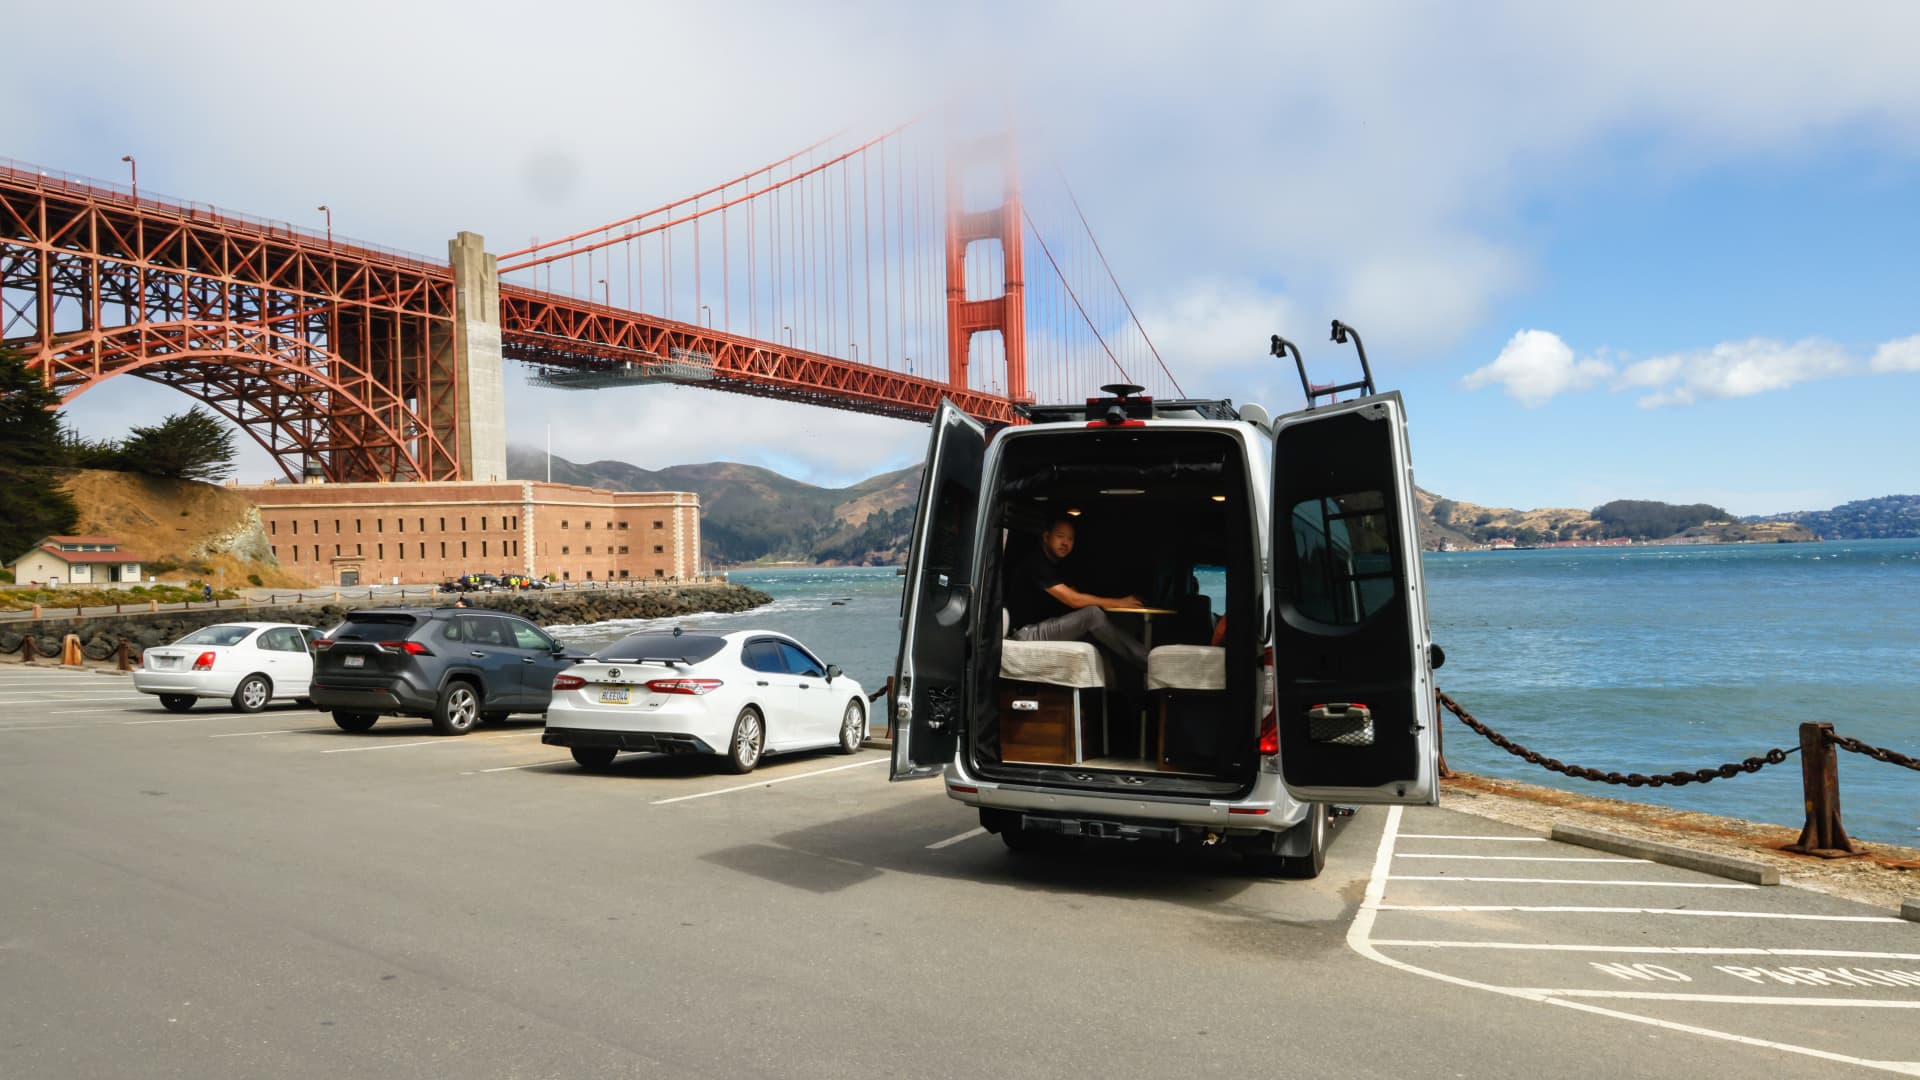 Kenzo Fong, CEO of tech start-up Rock, began working out of his van in May 2020 after his children began doing their schoolwork at home during the pandemic.